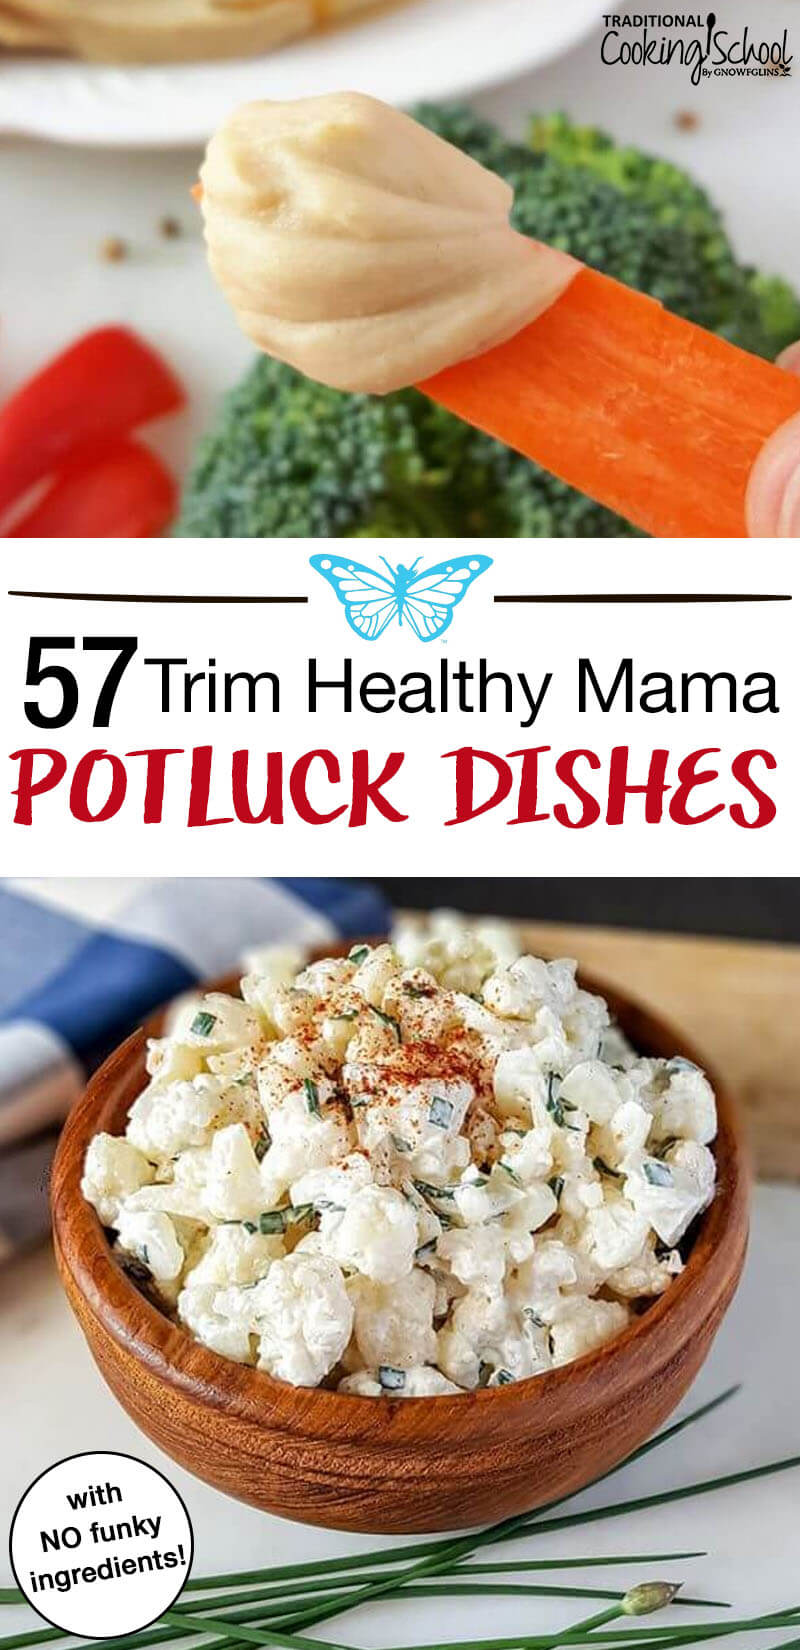 You're thriving on the Trim Healthy Mama plan, losing weight, balancing your blood sugar, experiencing more energy, and feeling great! Until it's time leave the comfort of your own kitchen and go to a place where THM rules don't exist -- potlucks! Here are some easy ideas for healthy appetizers, salads, desserts and sides. Arrive to any potluck with one or two of these Trim Healthy Mama recipes to keep you on track without skipping a beat!